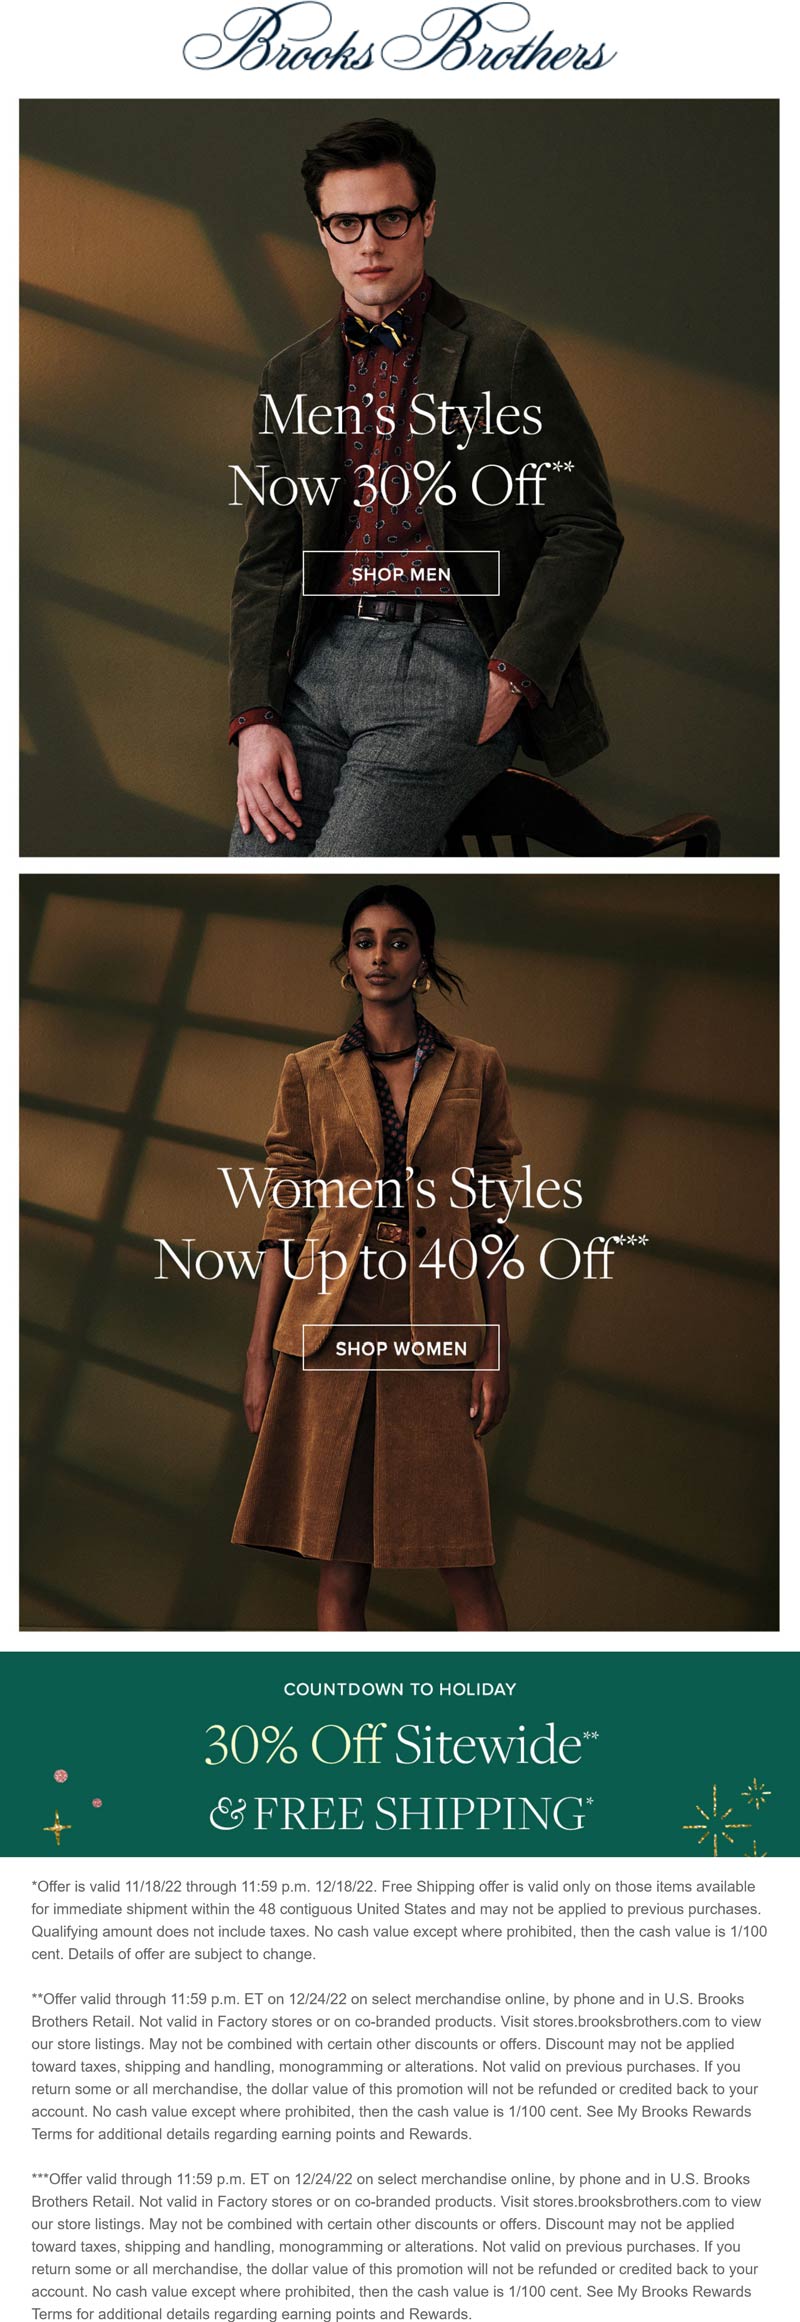 Brooks Brothers stores Coupon  30% off everything at Brooks Brothers, ditto online #brooksbrothers 